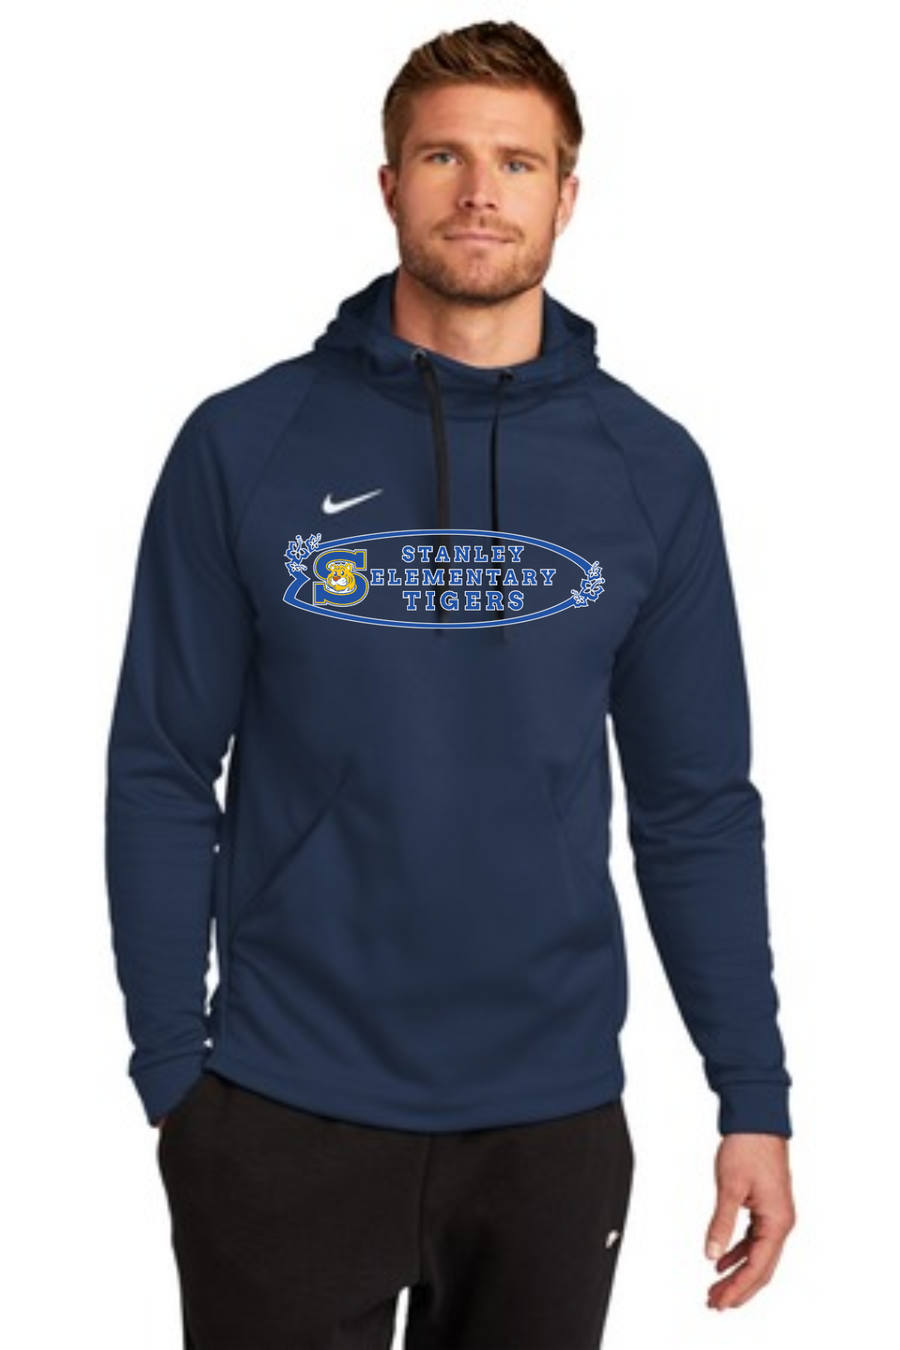 The Tiger Store - Stanley Elementary 2023/24-On-Demand Nike Therma-FIT Pullover Fleece Hoodie Surf Board Logo